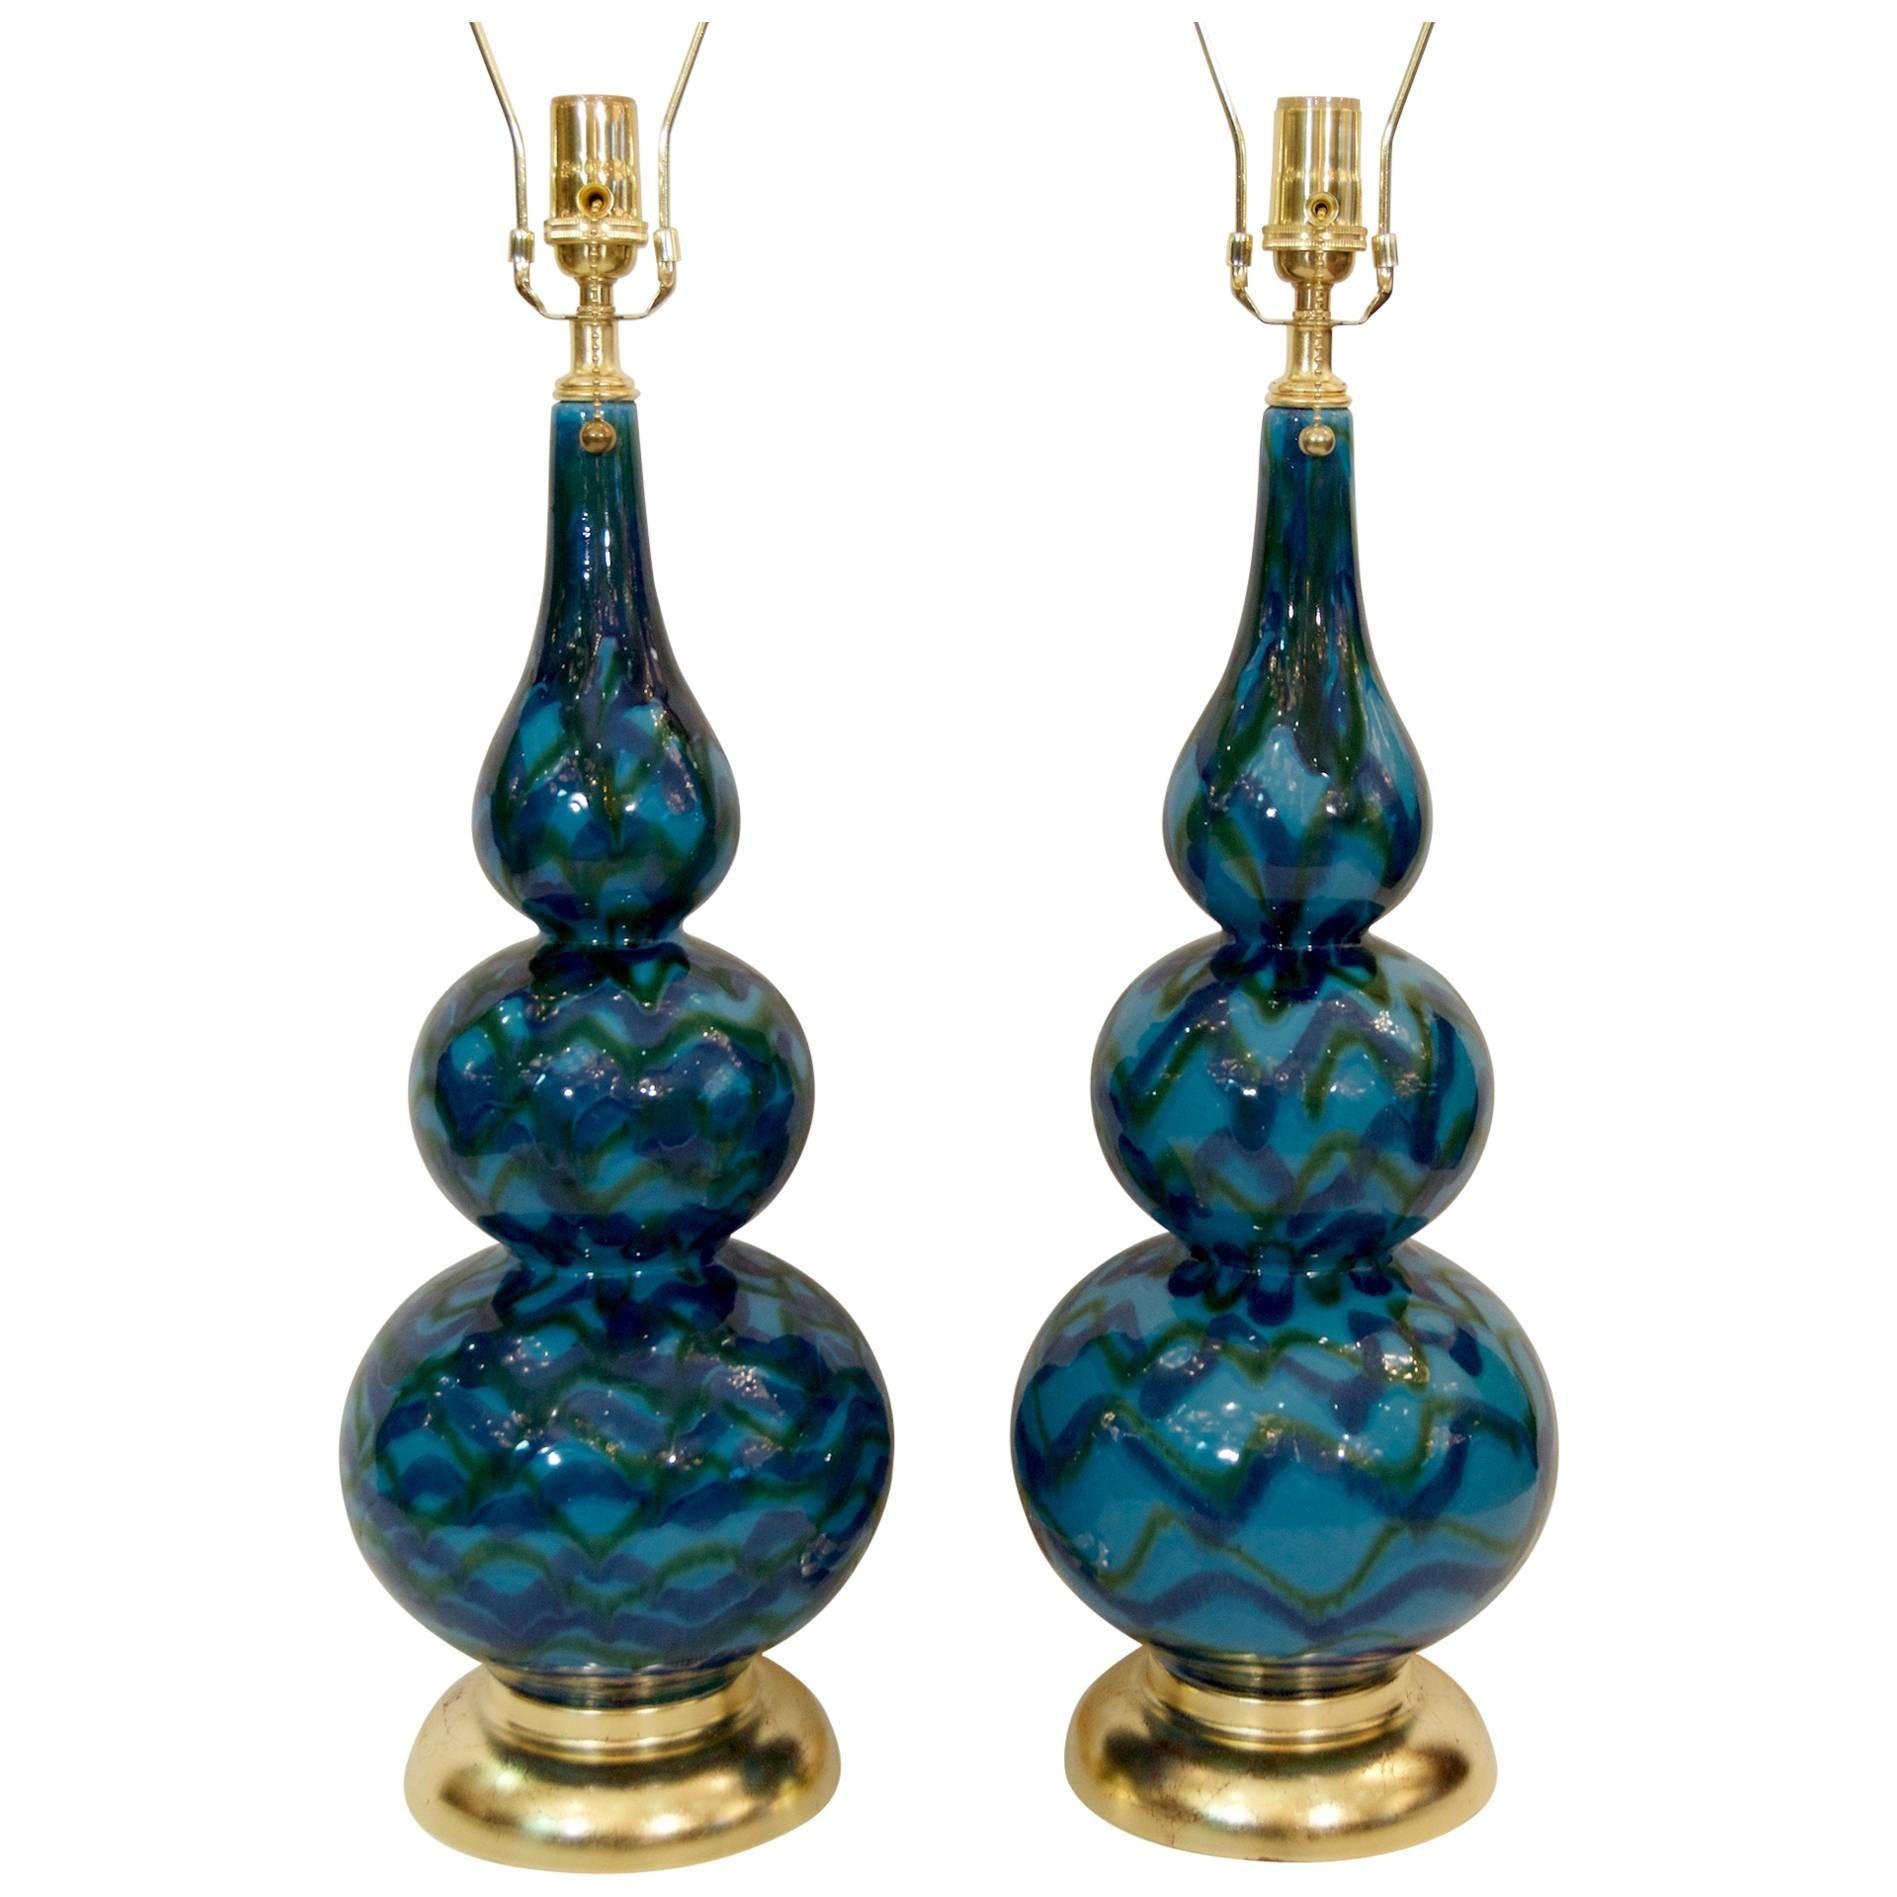 Pair of Blue Glazed Table Lamps with Gold Leaf Hardware